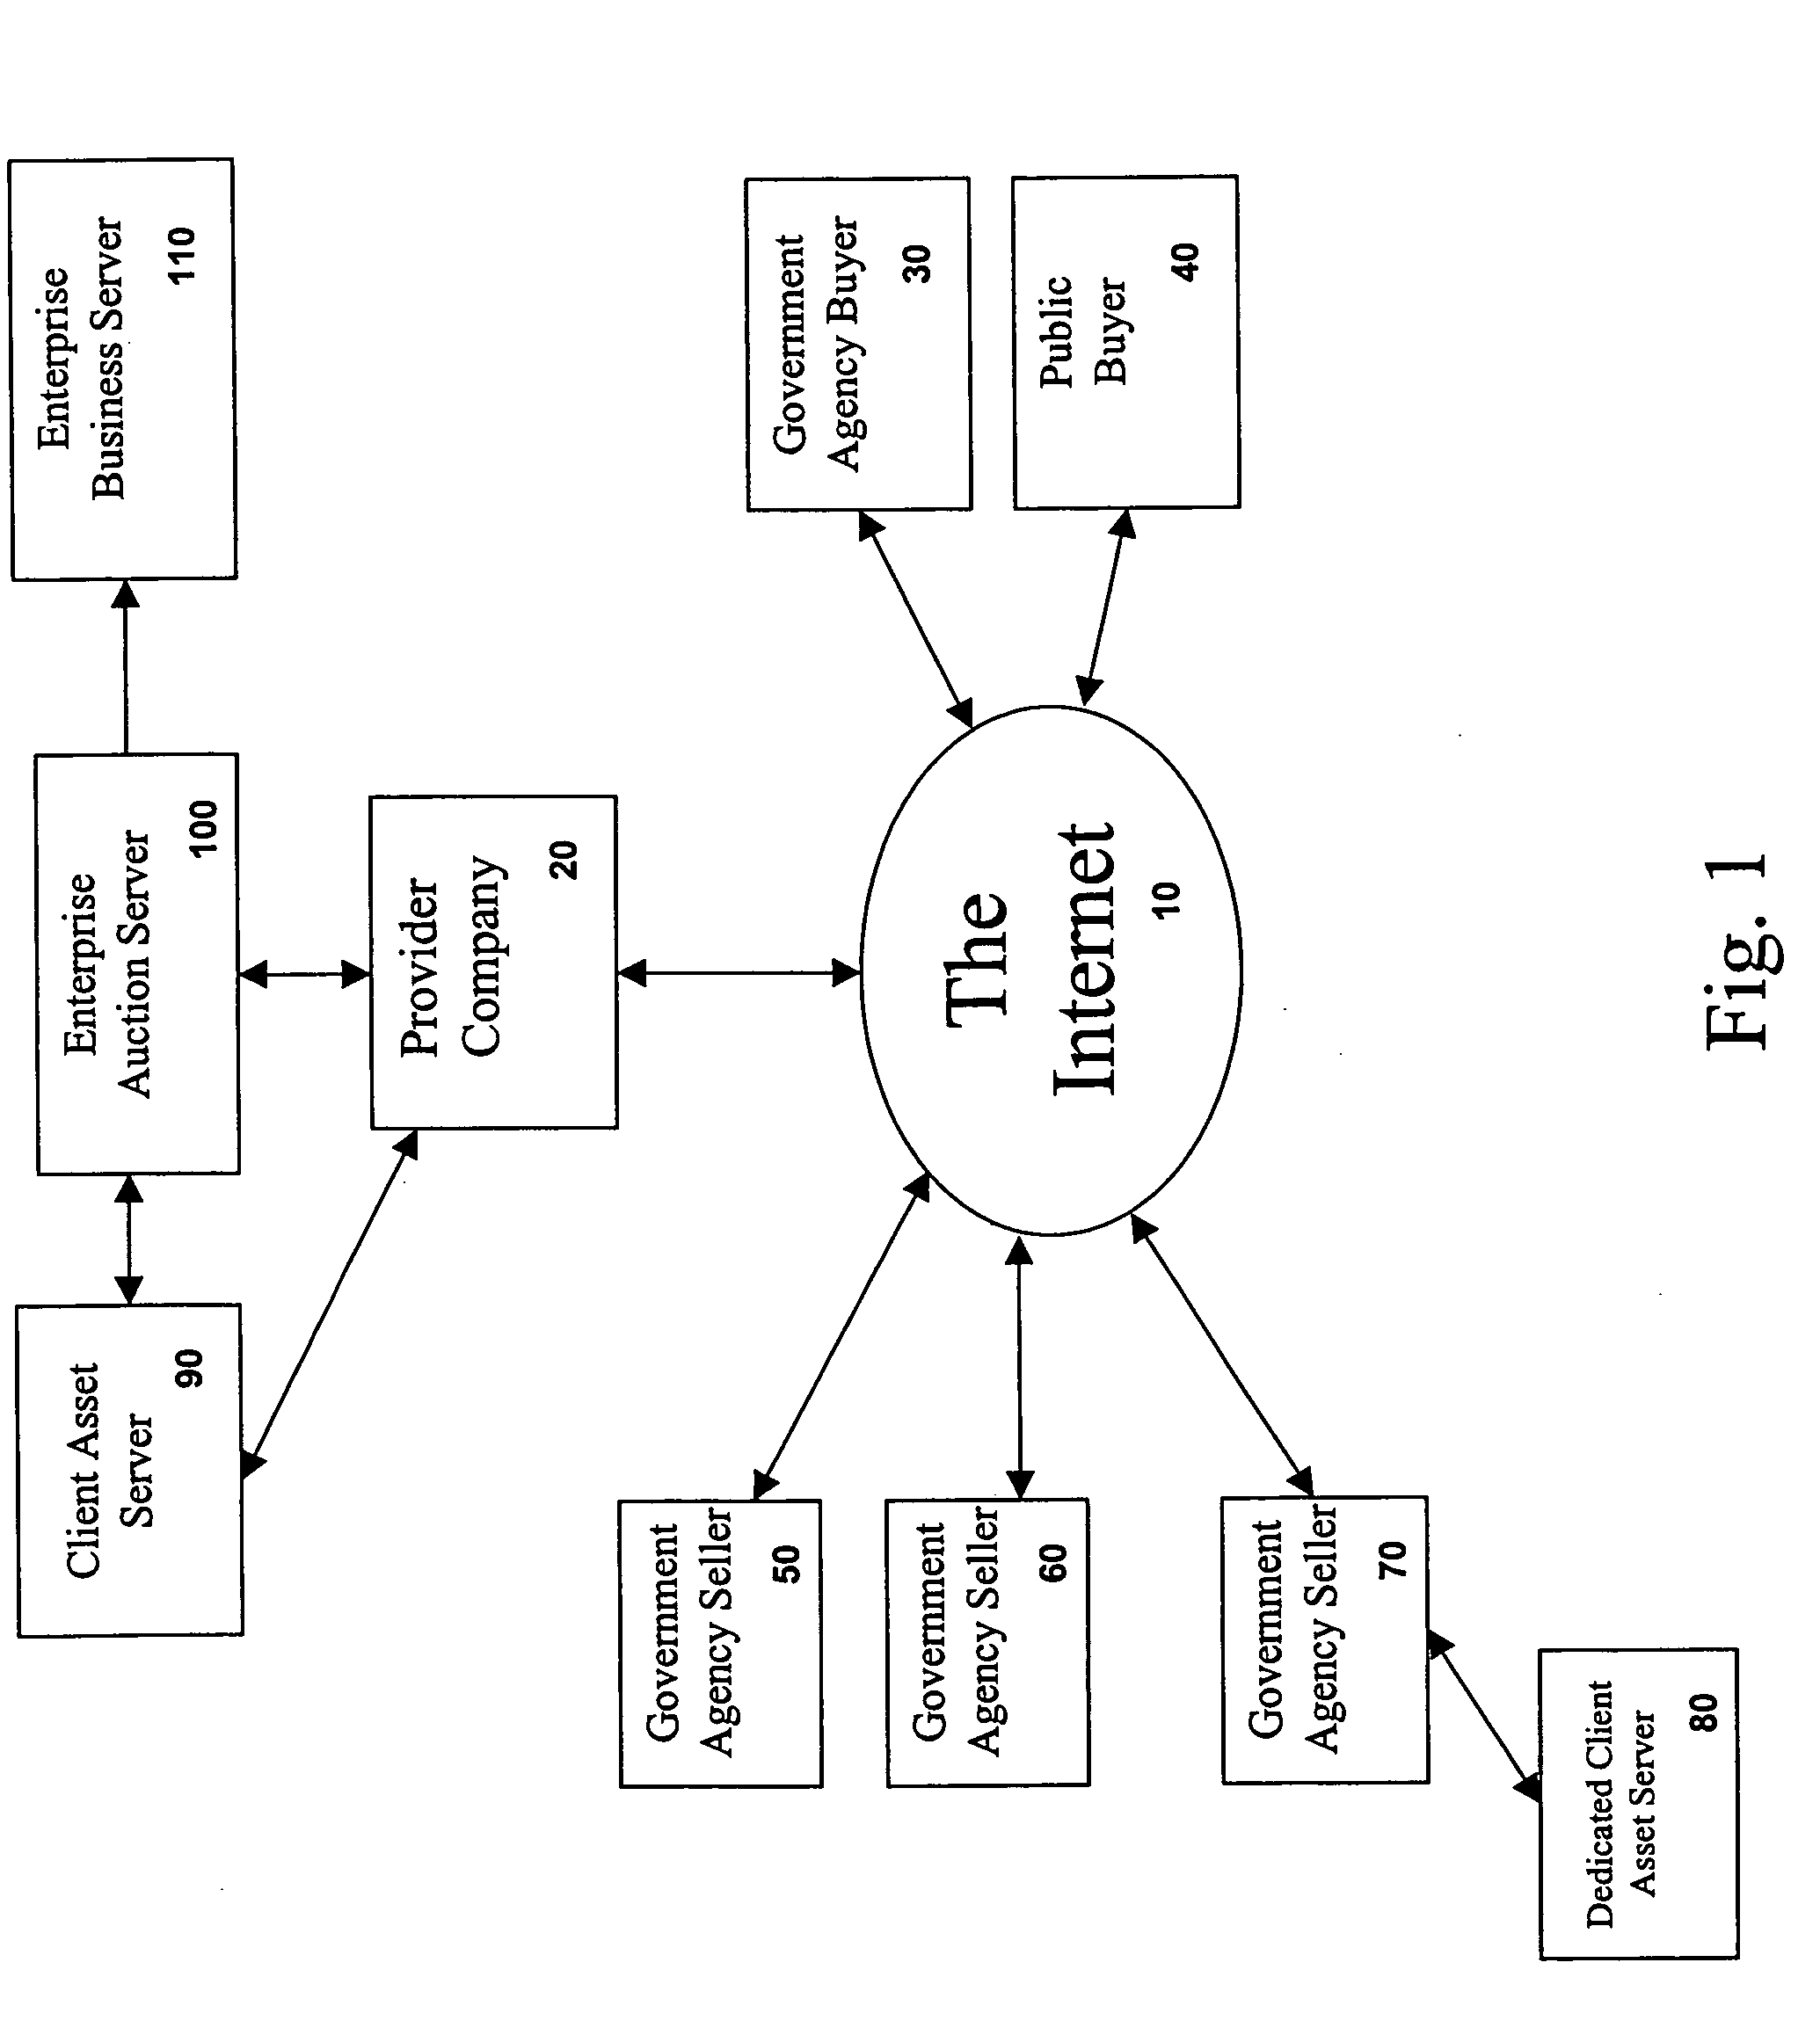 Method for conducting a computerized auction